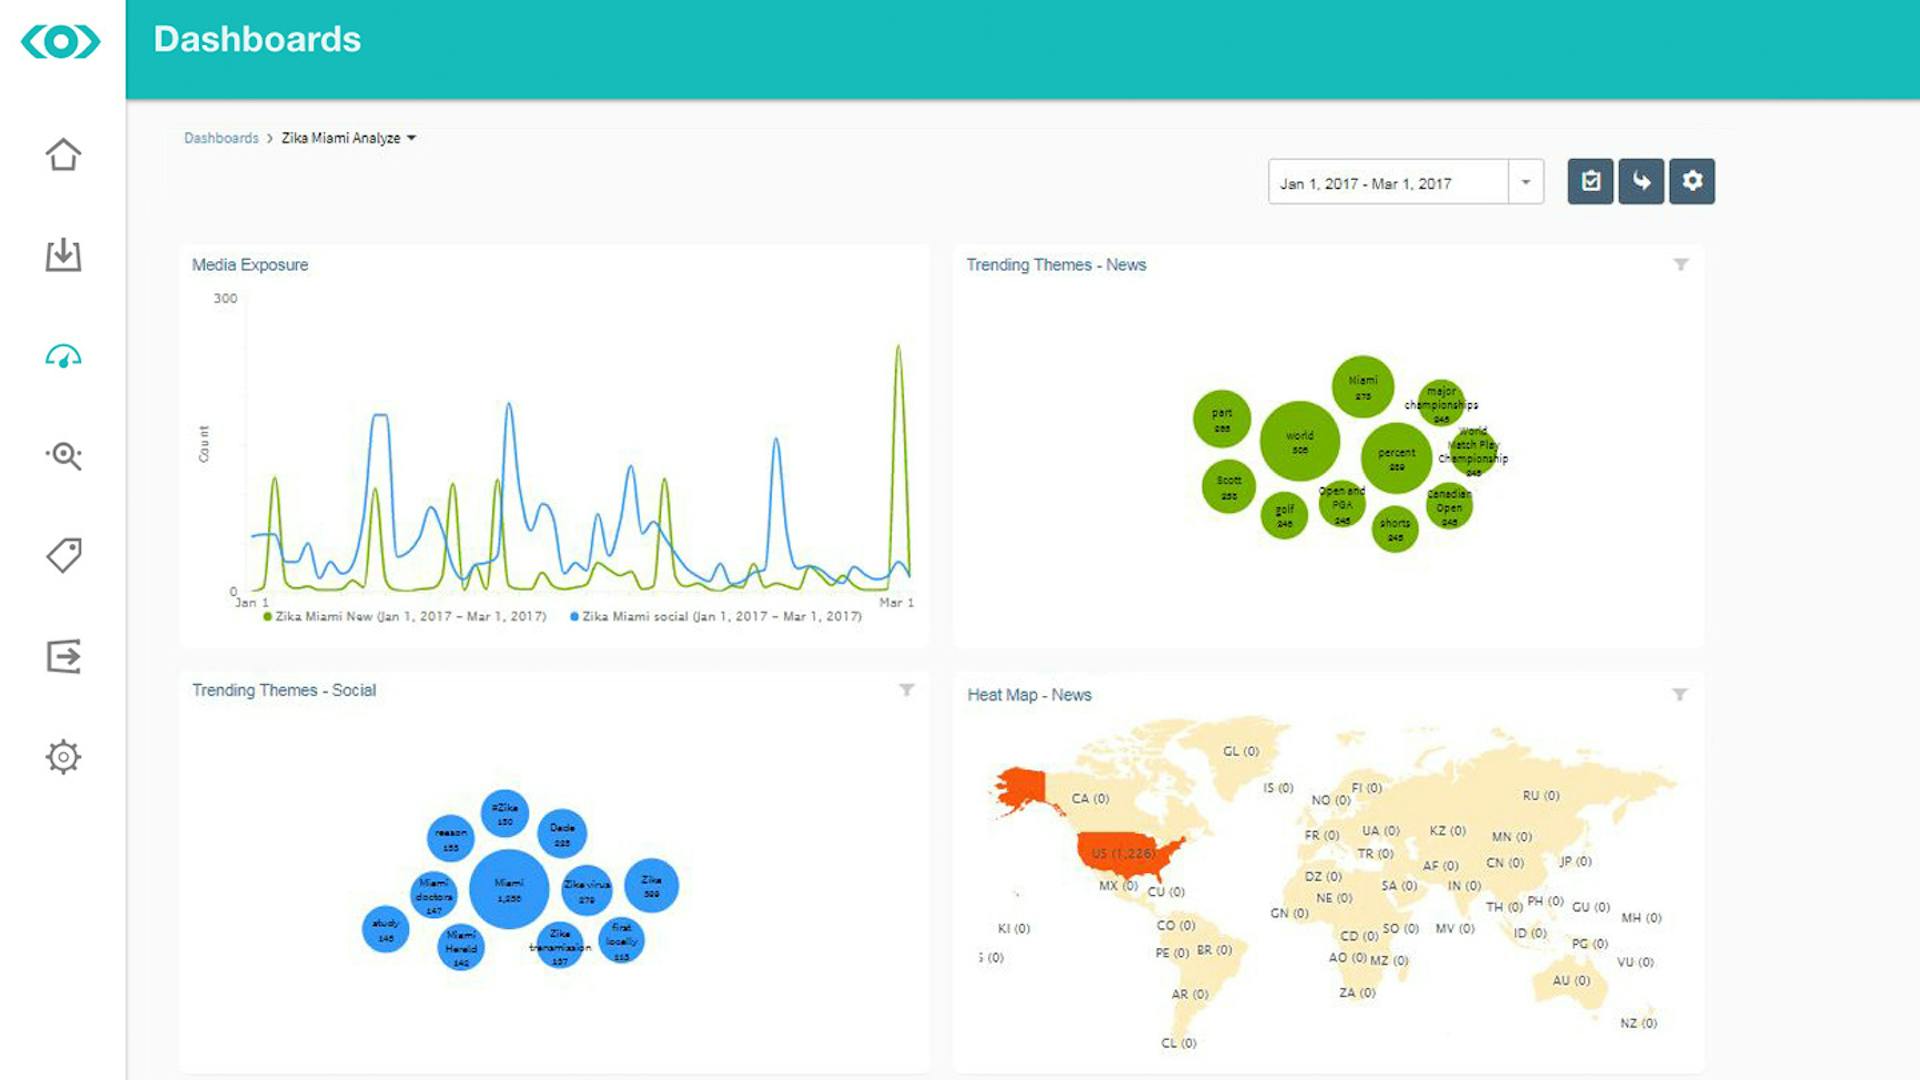 Screenshot of the Meltwater Dashboards